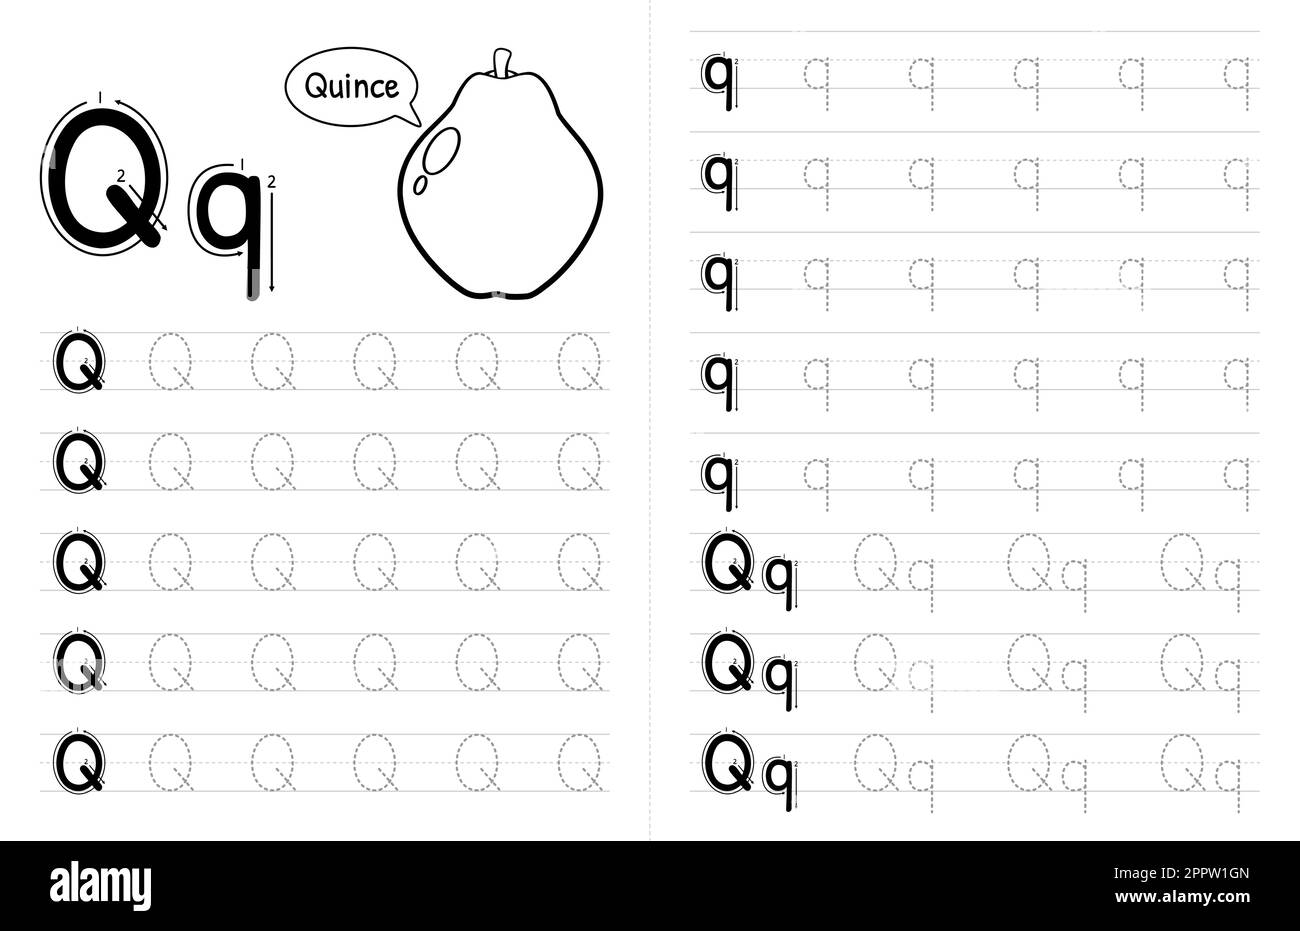 The ABCs of the QQQs